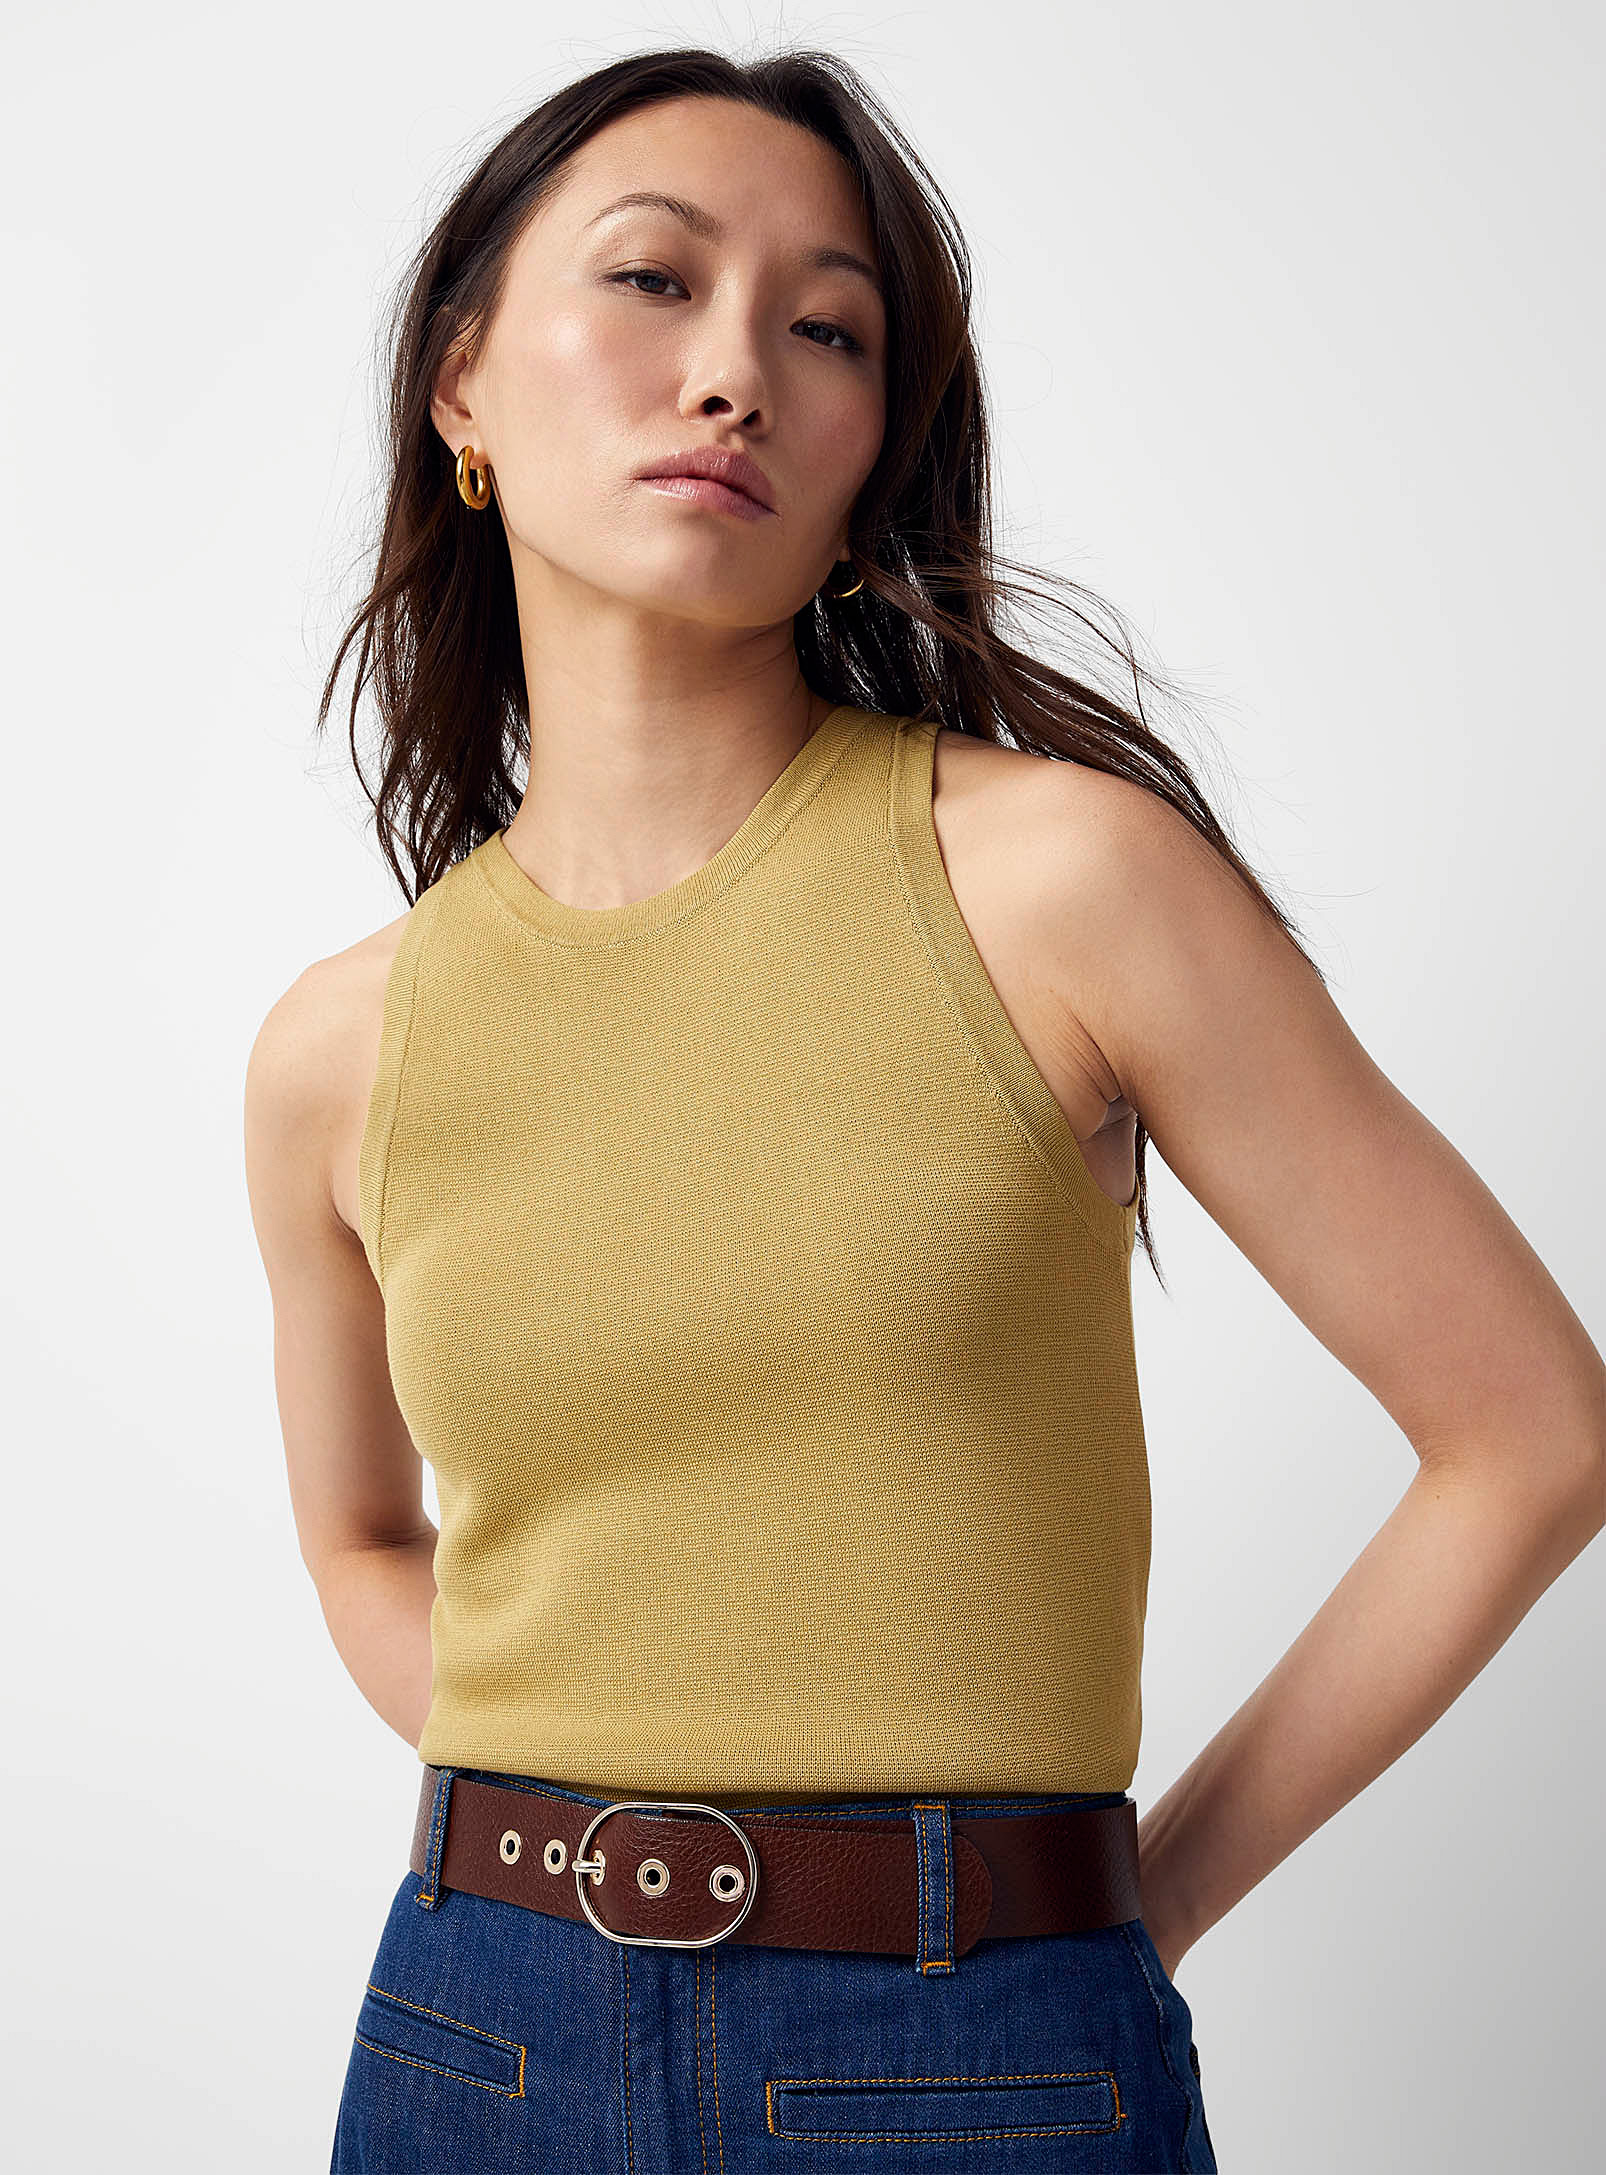 Contemporaine Shiny Knit Crew-neck Sweater Vest In Golden Yellow